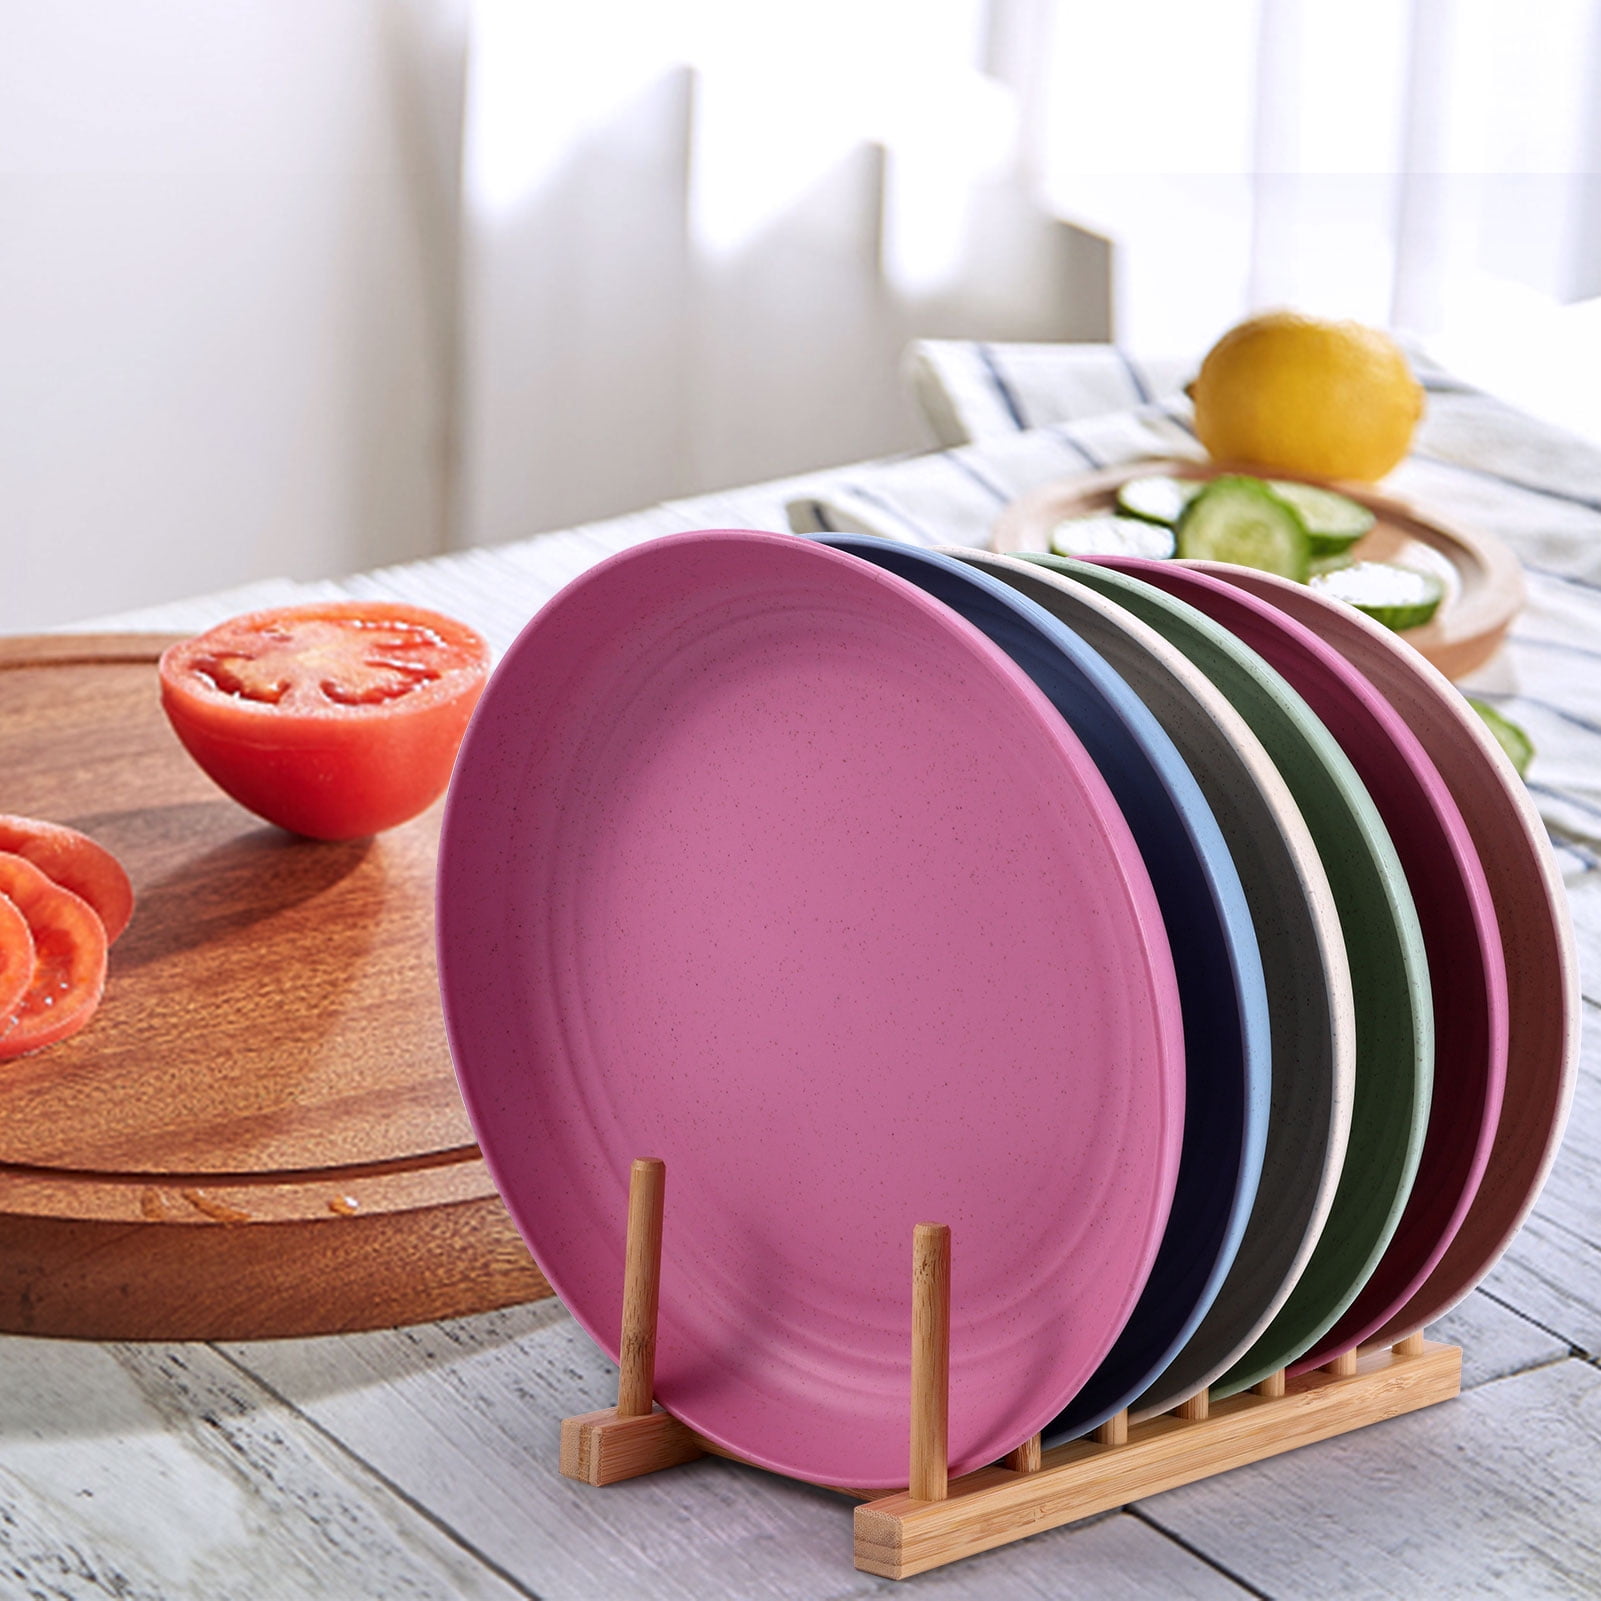 New Eco-Friendly Wheat Straw Divided Plate Fruit Salad Plate Food Tray  Dinner Plate Compartment Plate Kitchen Dinnerware Plates